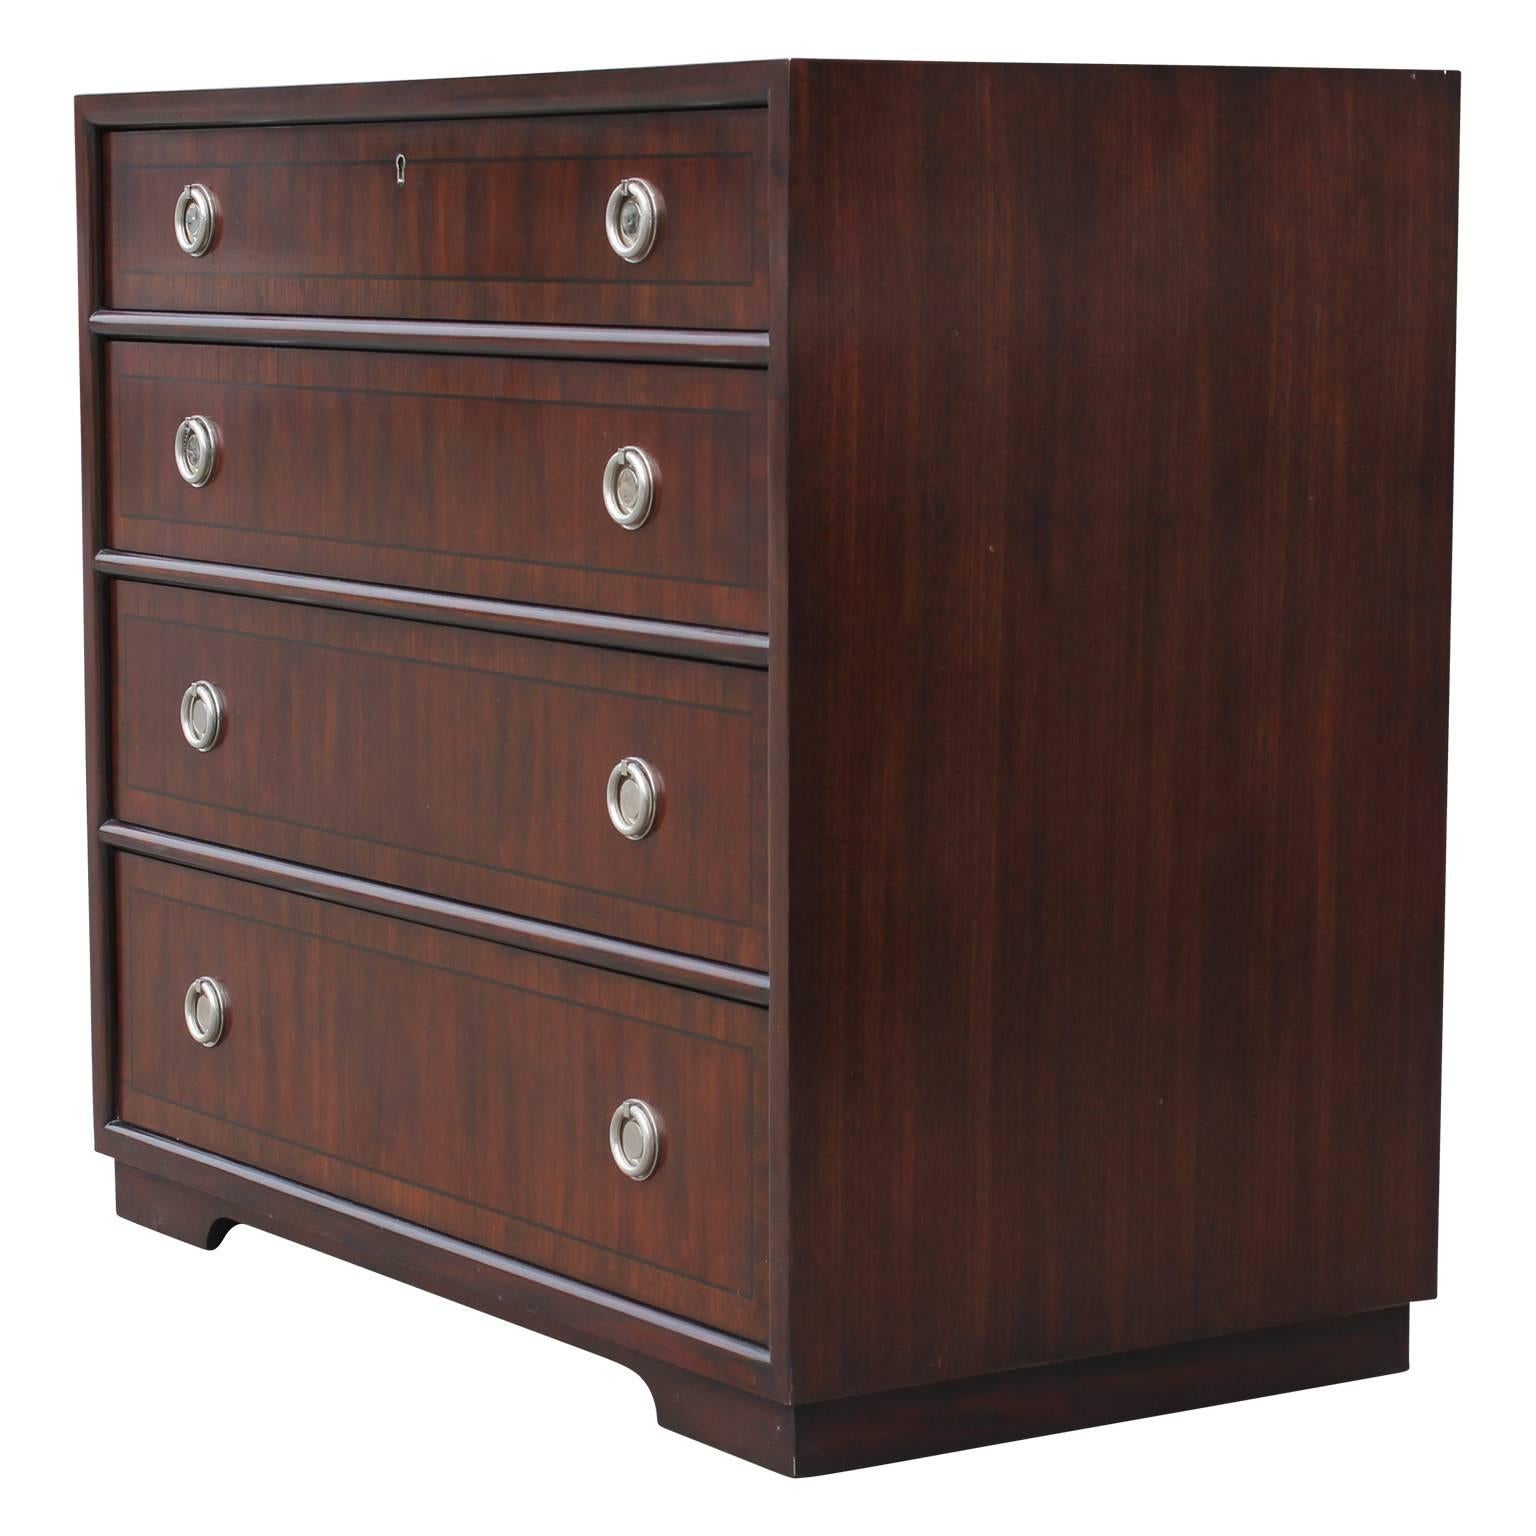 Mid-20th Century Pair of Modern Walnut Henredon Bachelor's Chest with Silver Ring Pulls